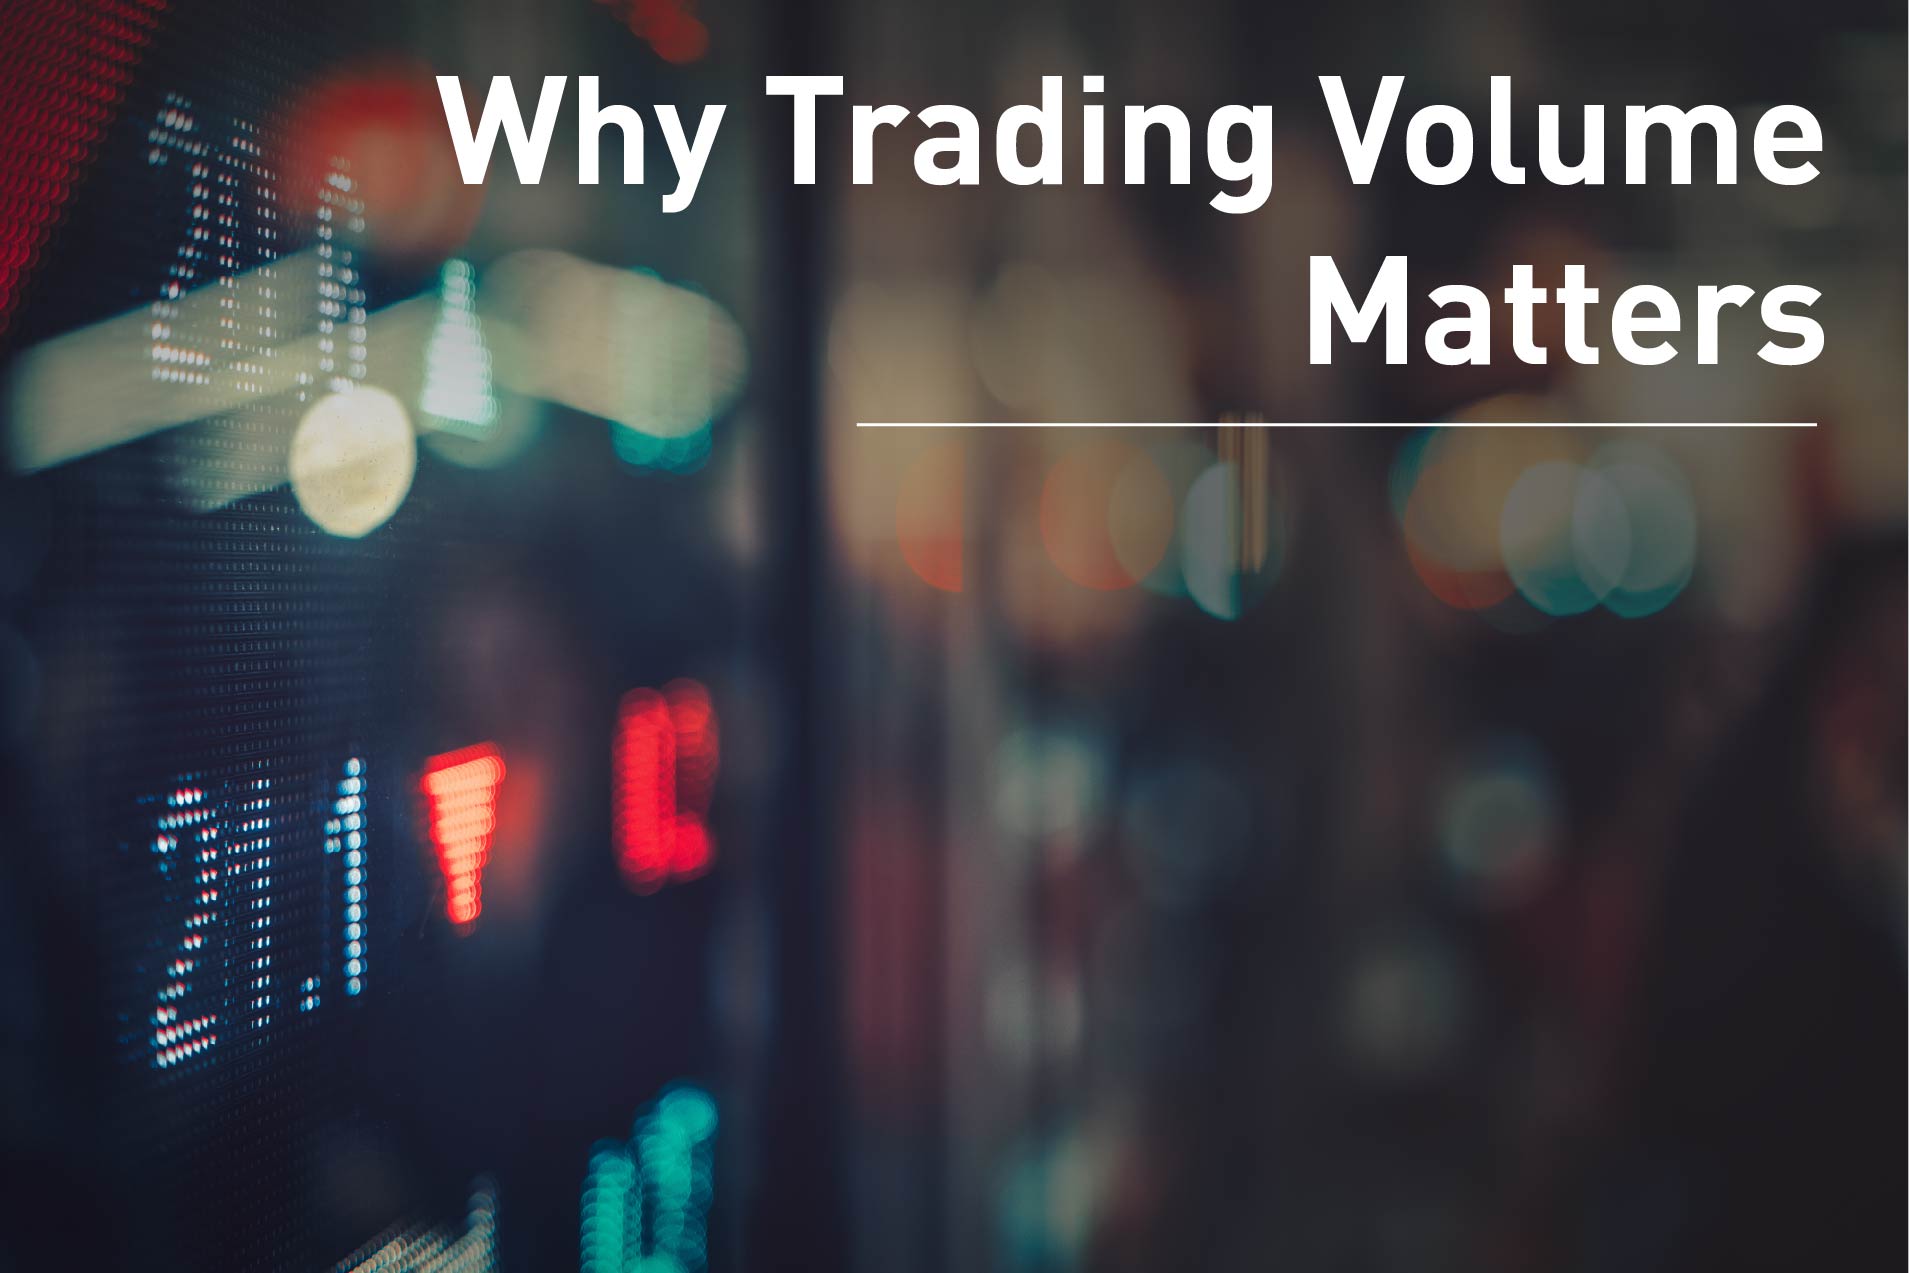 Why Trading Volume Matters